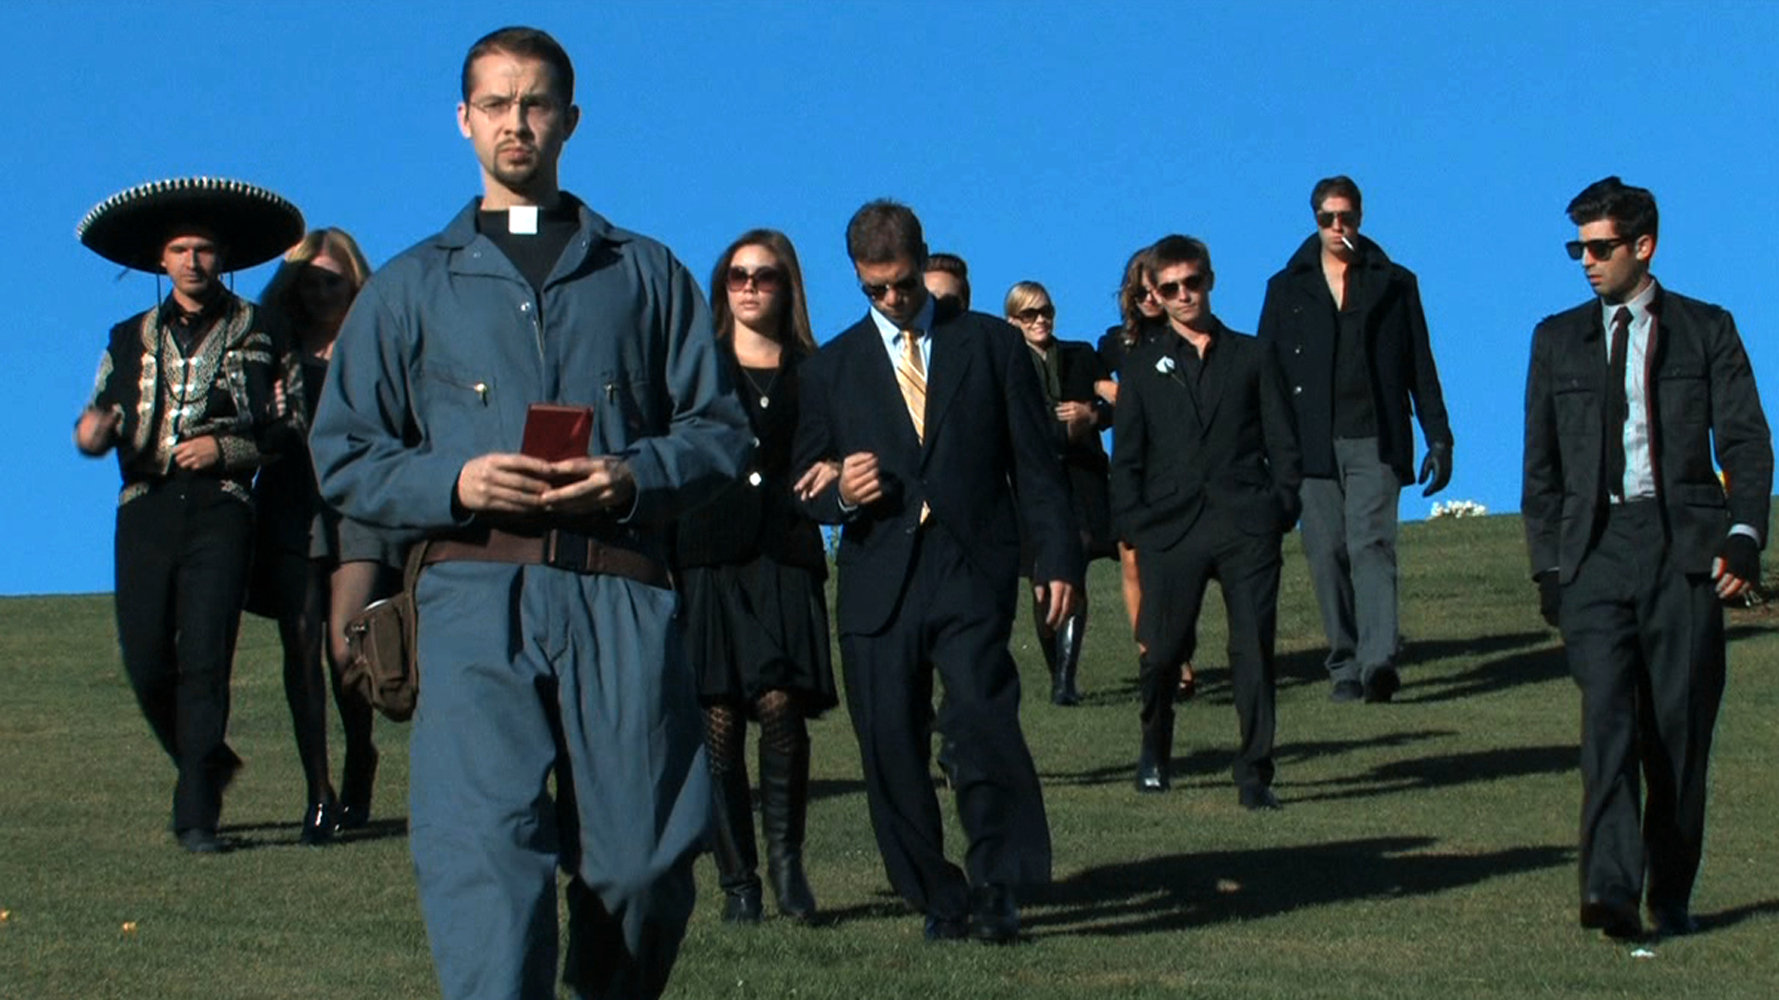 Photo date: 2008 VALLEY PEAKS: The funeral of Kyle was one to remember on Valley Peaks episode 